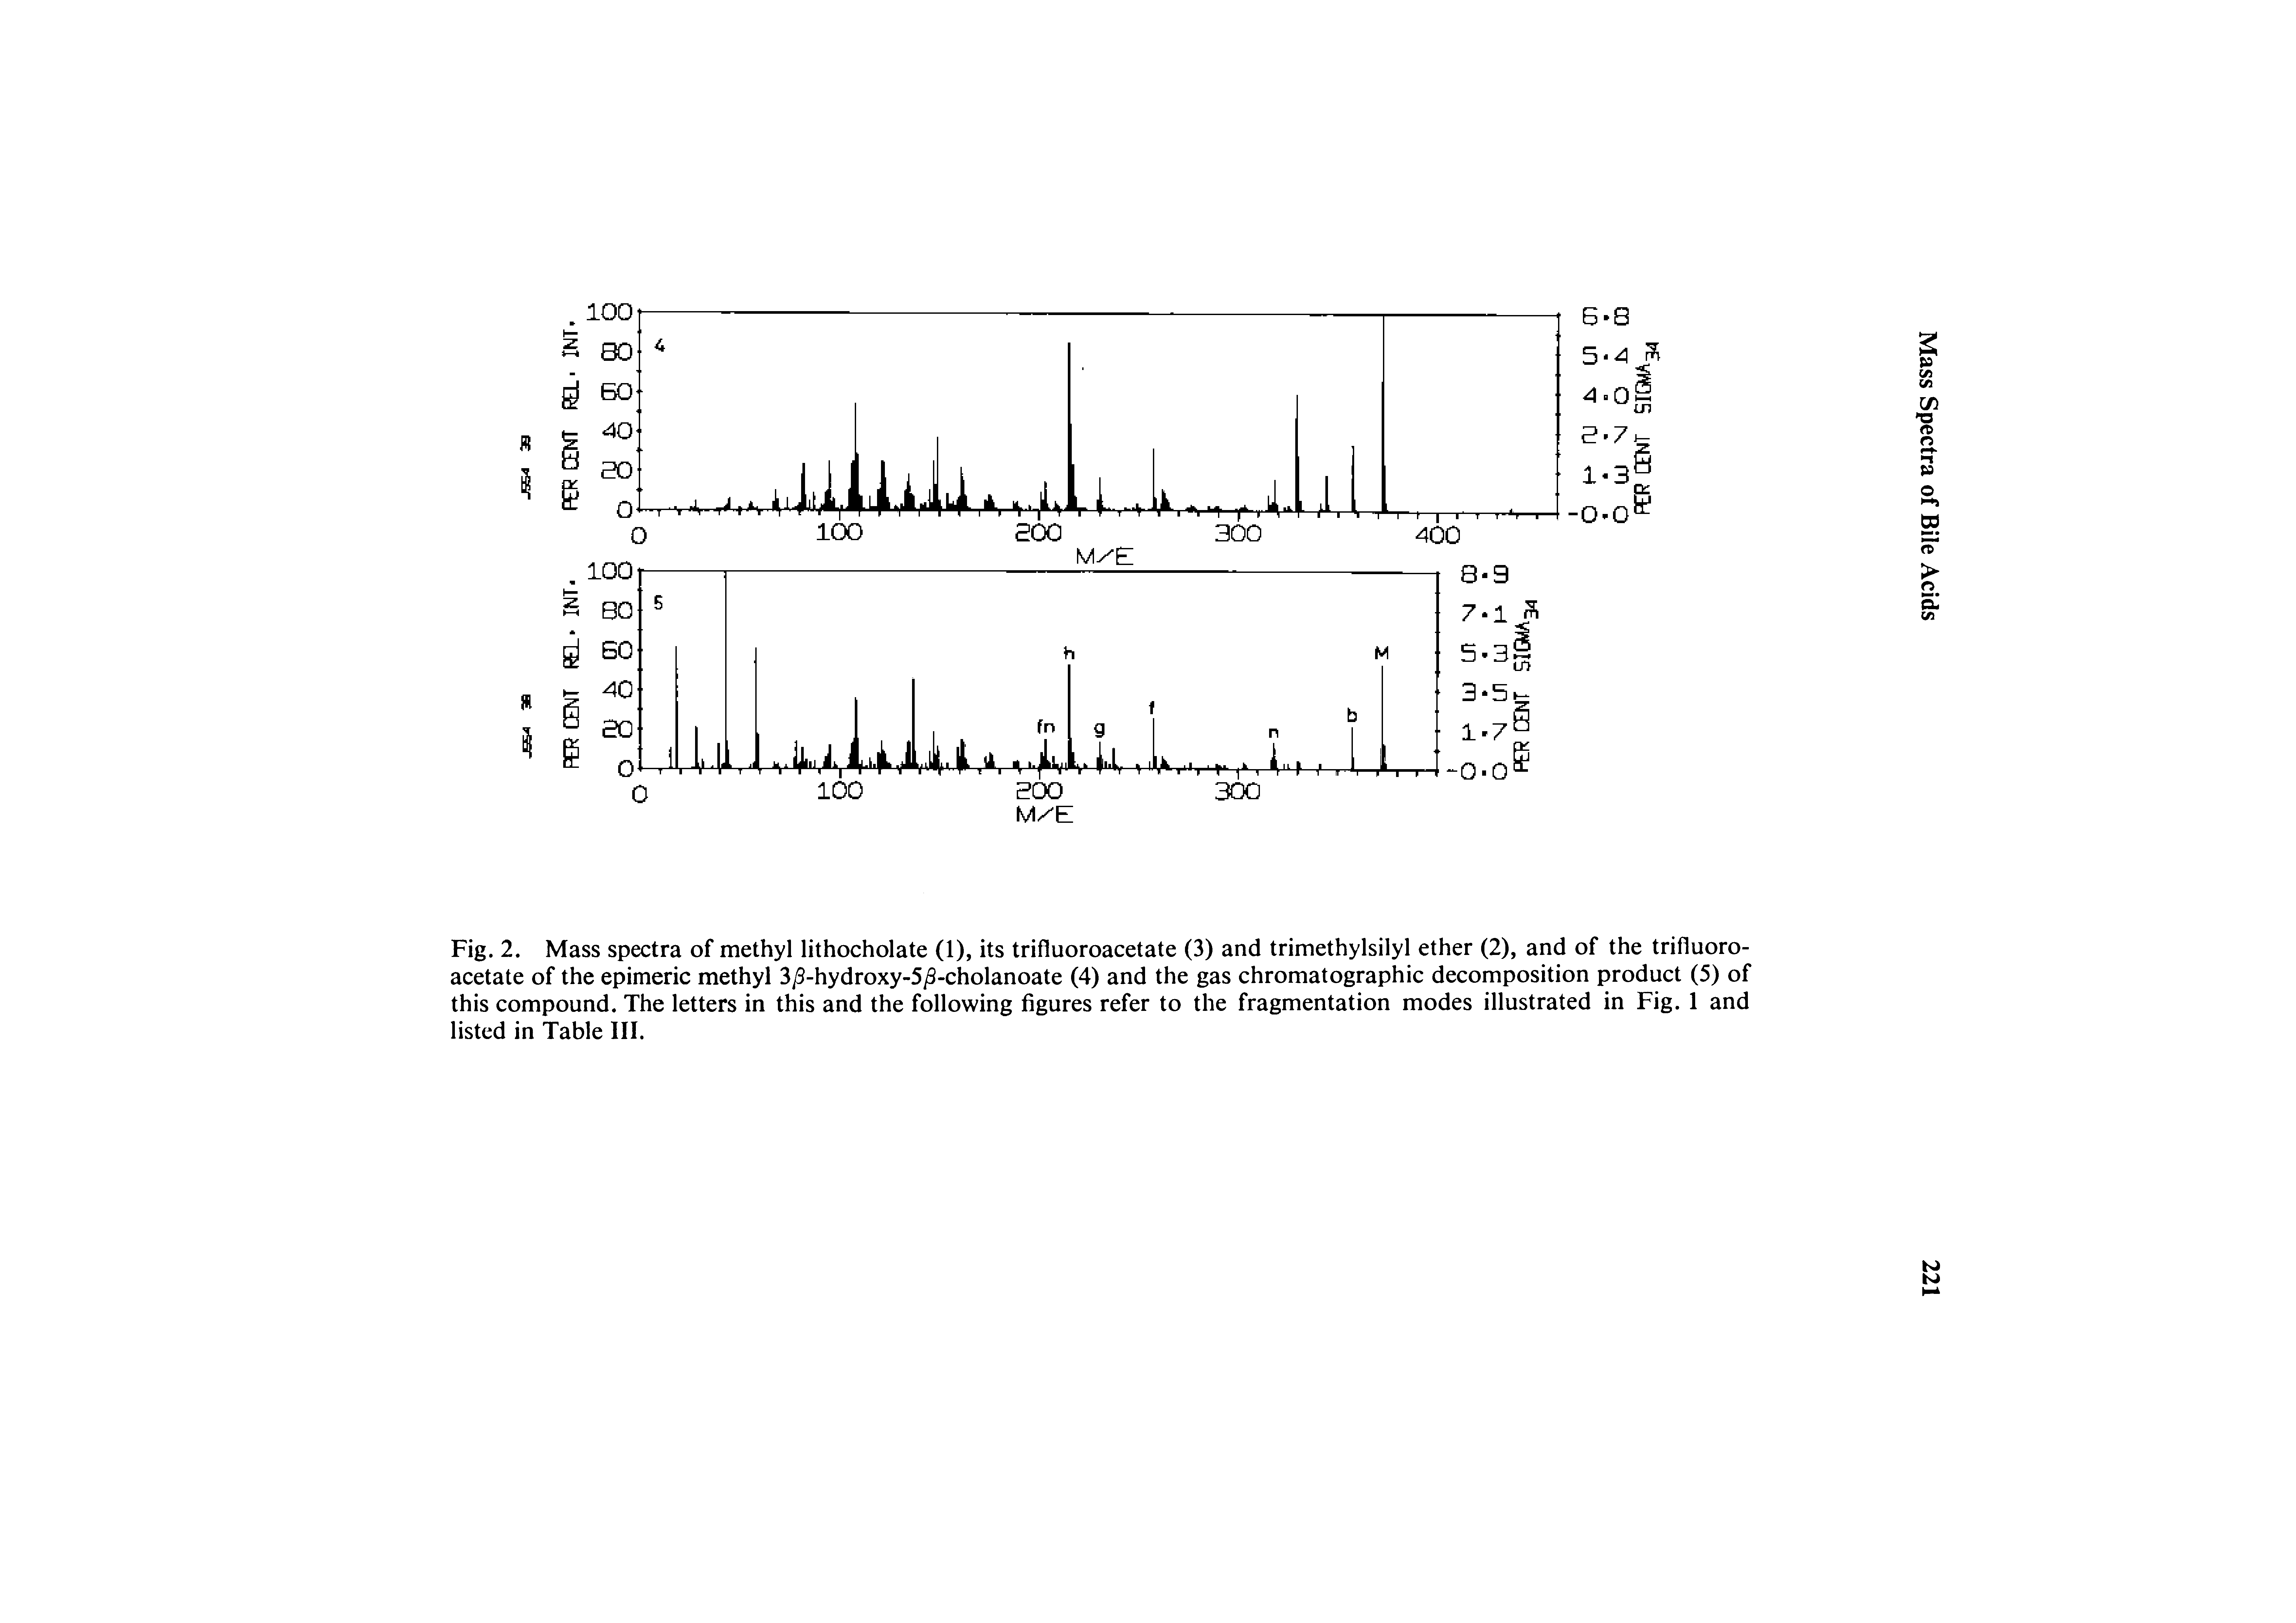 Fig. 2. Mass spectra of methyl lithocholate (1), its trifiuoroacetate (3) and trimethylsilyl ether (2), and of the trifluoro-acetate of the epimeric methyl 3 -hydroxy-5 -cholanoate (4) and the gas chromatographic decomposition product (5) of this compound. The letters in this and the following figures refer to the fragmentation modes illustrated in Fig. 1 and listed in Table III.